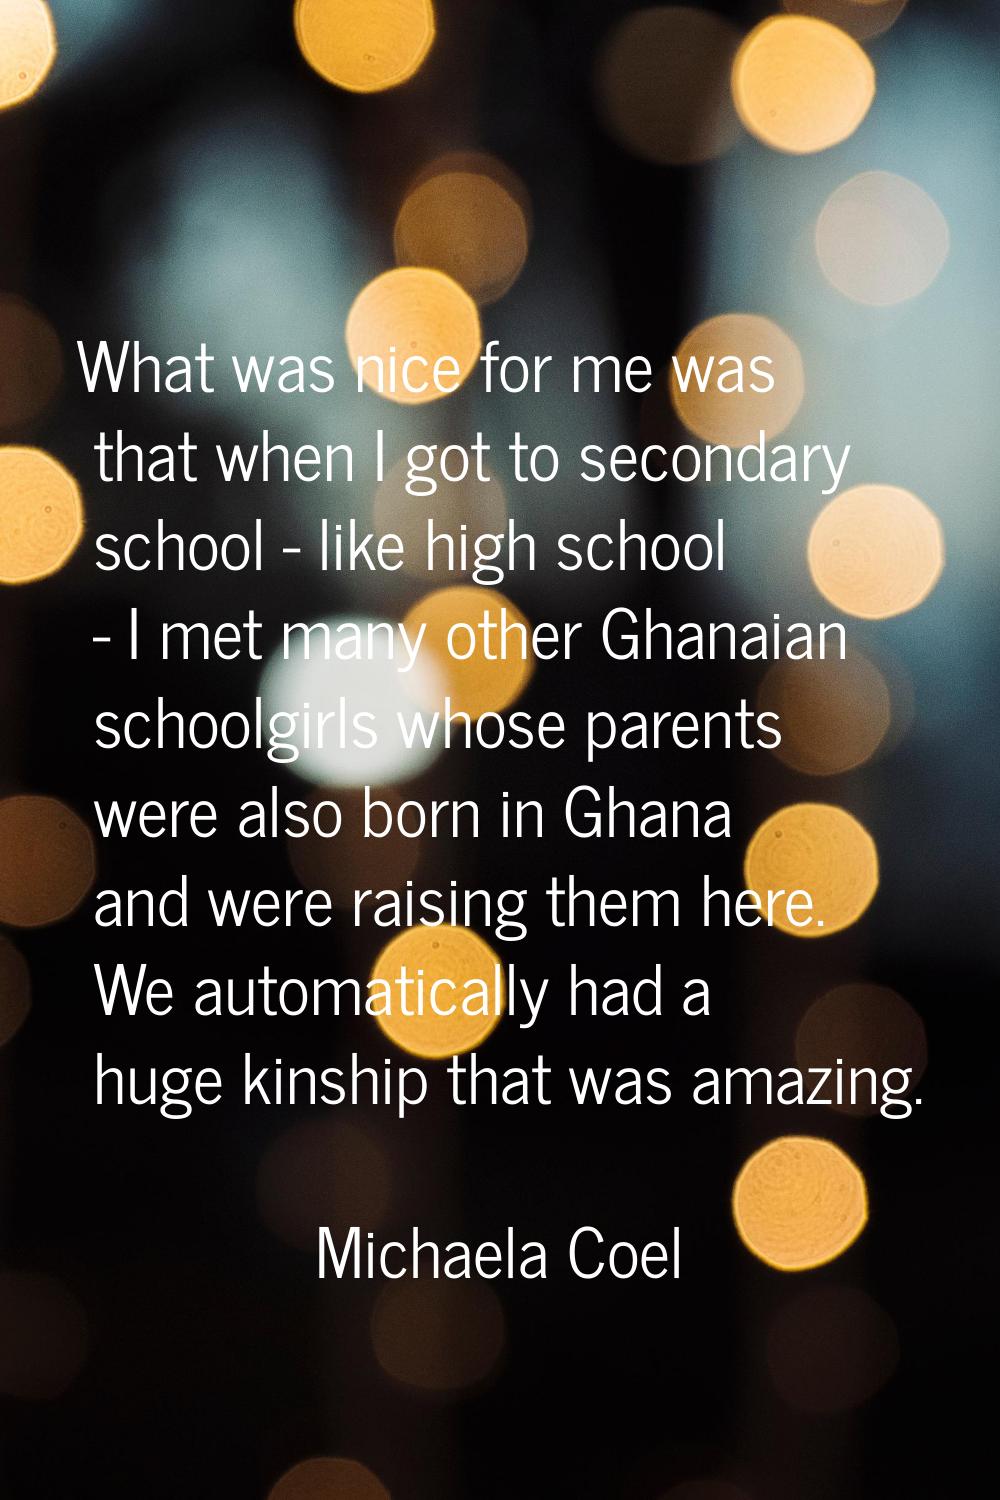 What was nice for me was that when I got to secondary school - like high school - I met many other 